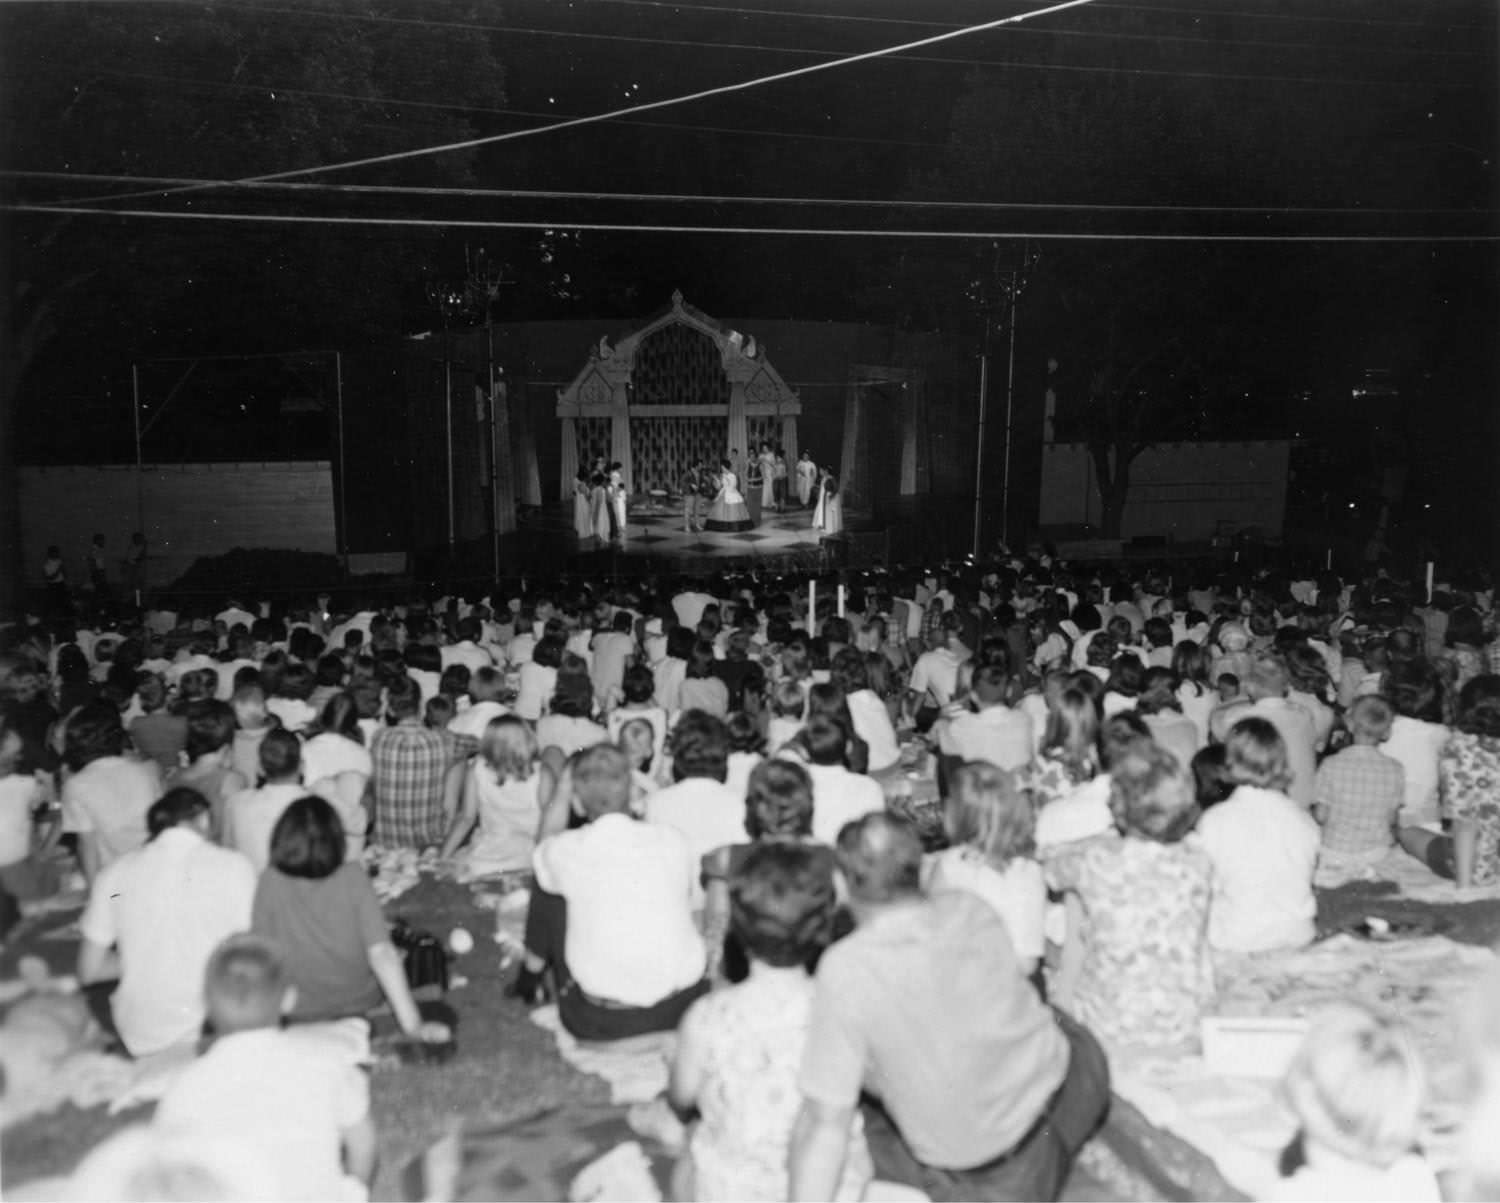 Crowd at Zilker Hillside Theater Production, 1966.